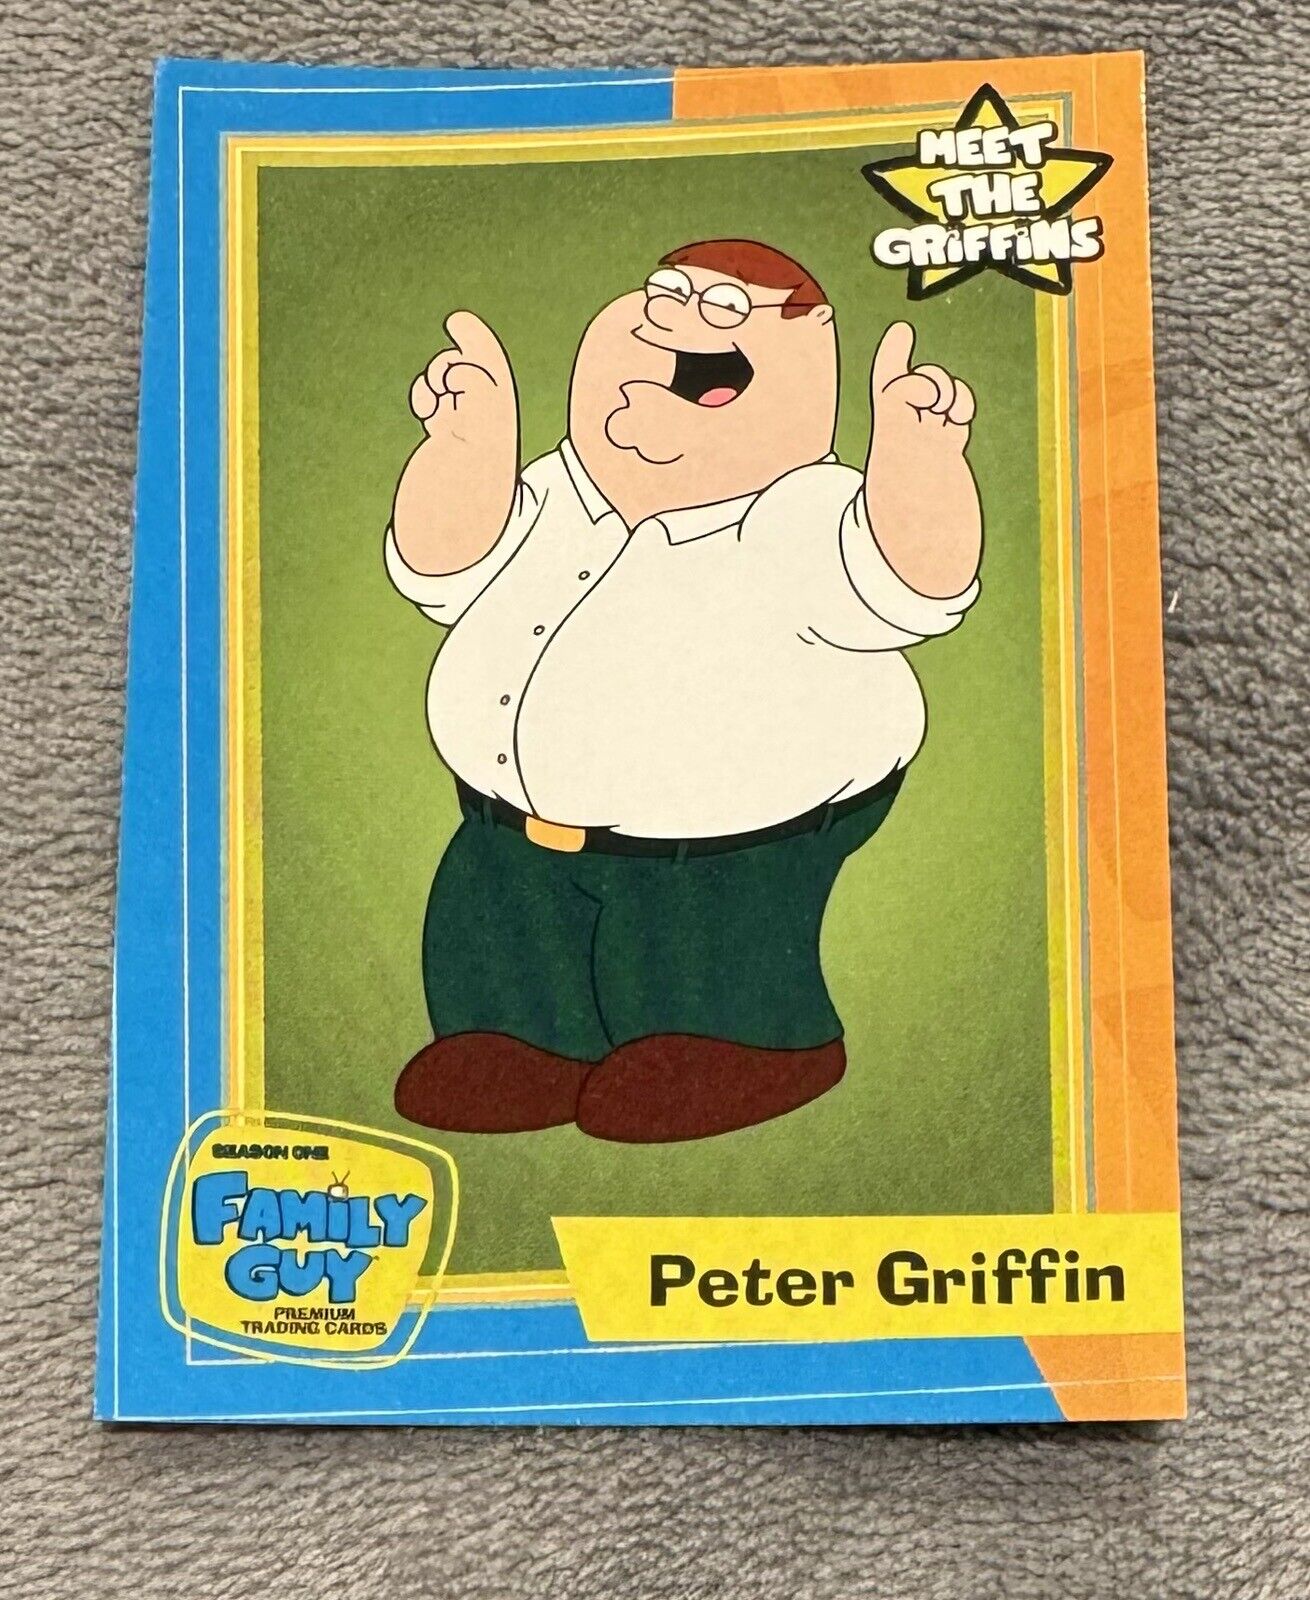 **RARE * POP 1 * ROOKIE  Peter Griffin Family Guy RC 2005 Season One